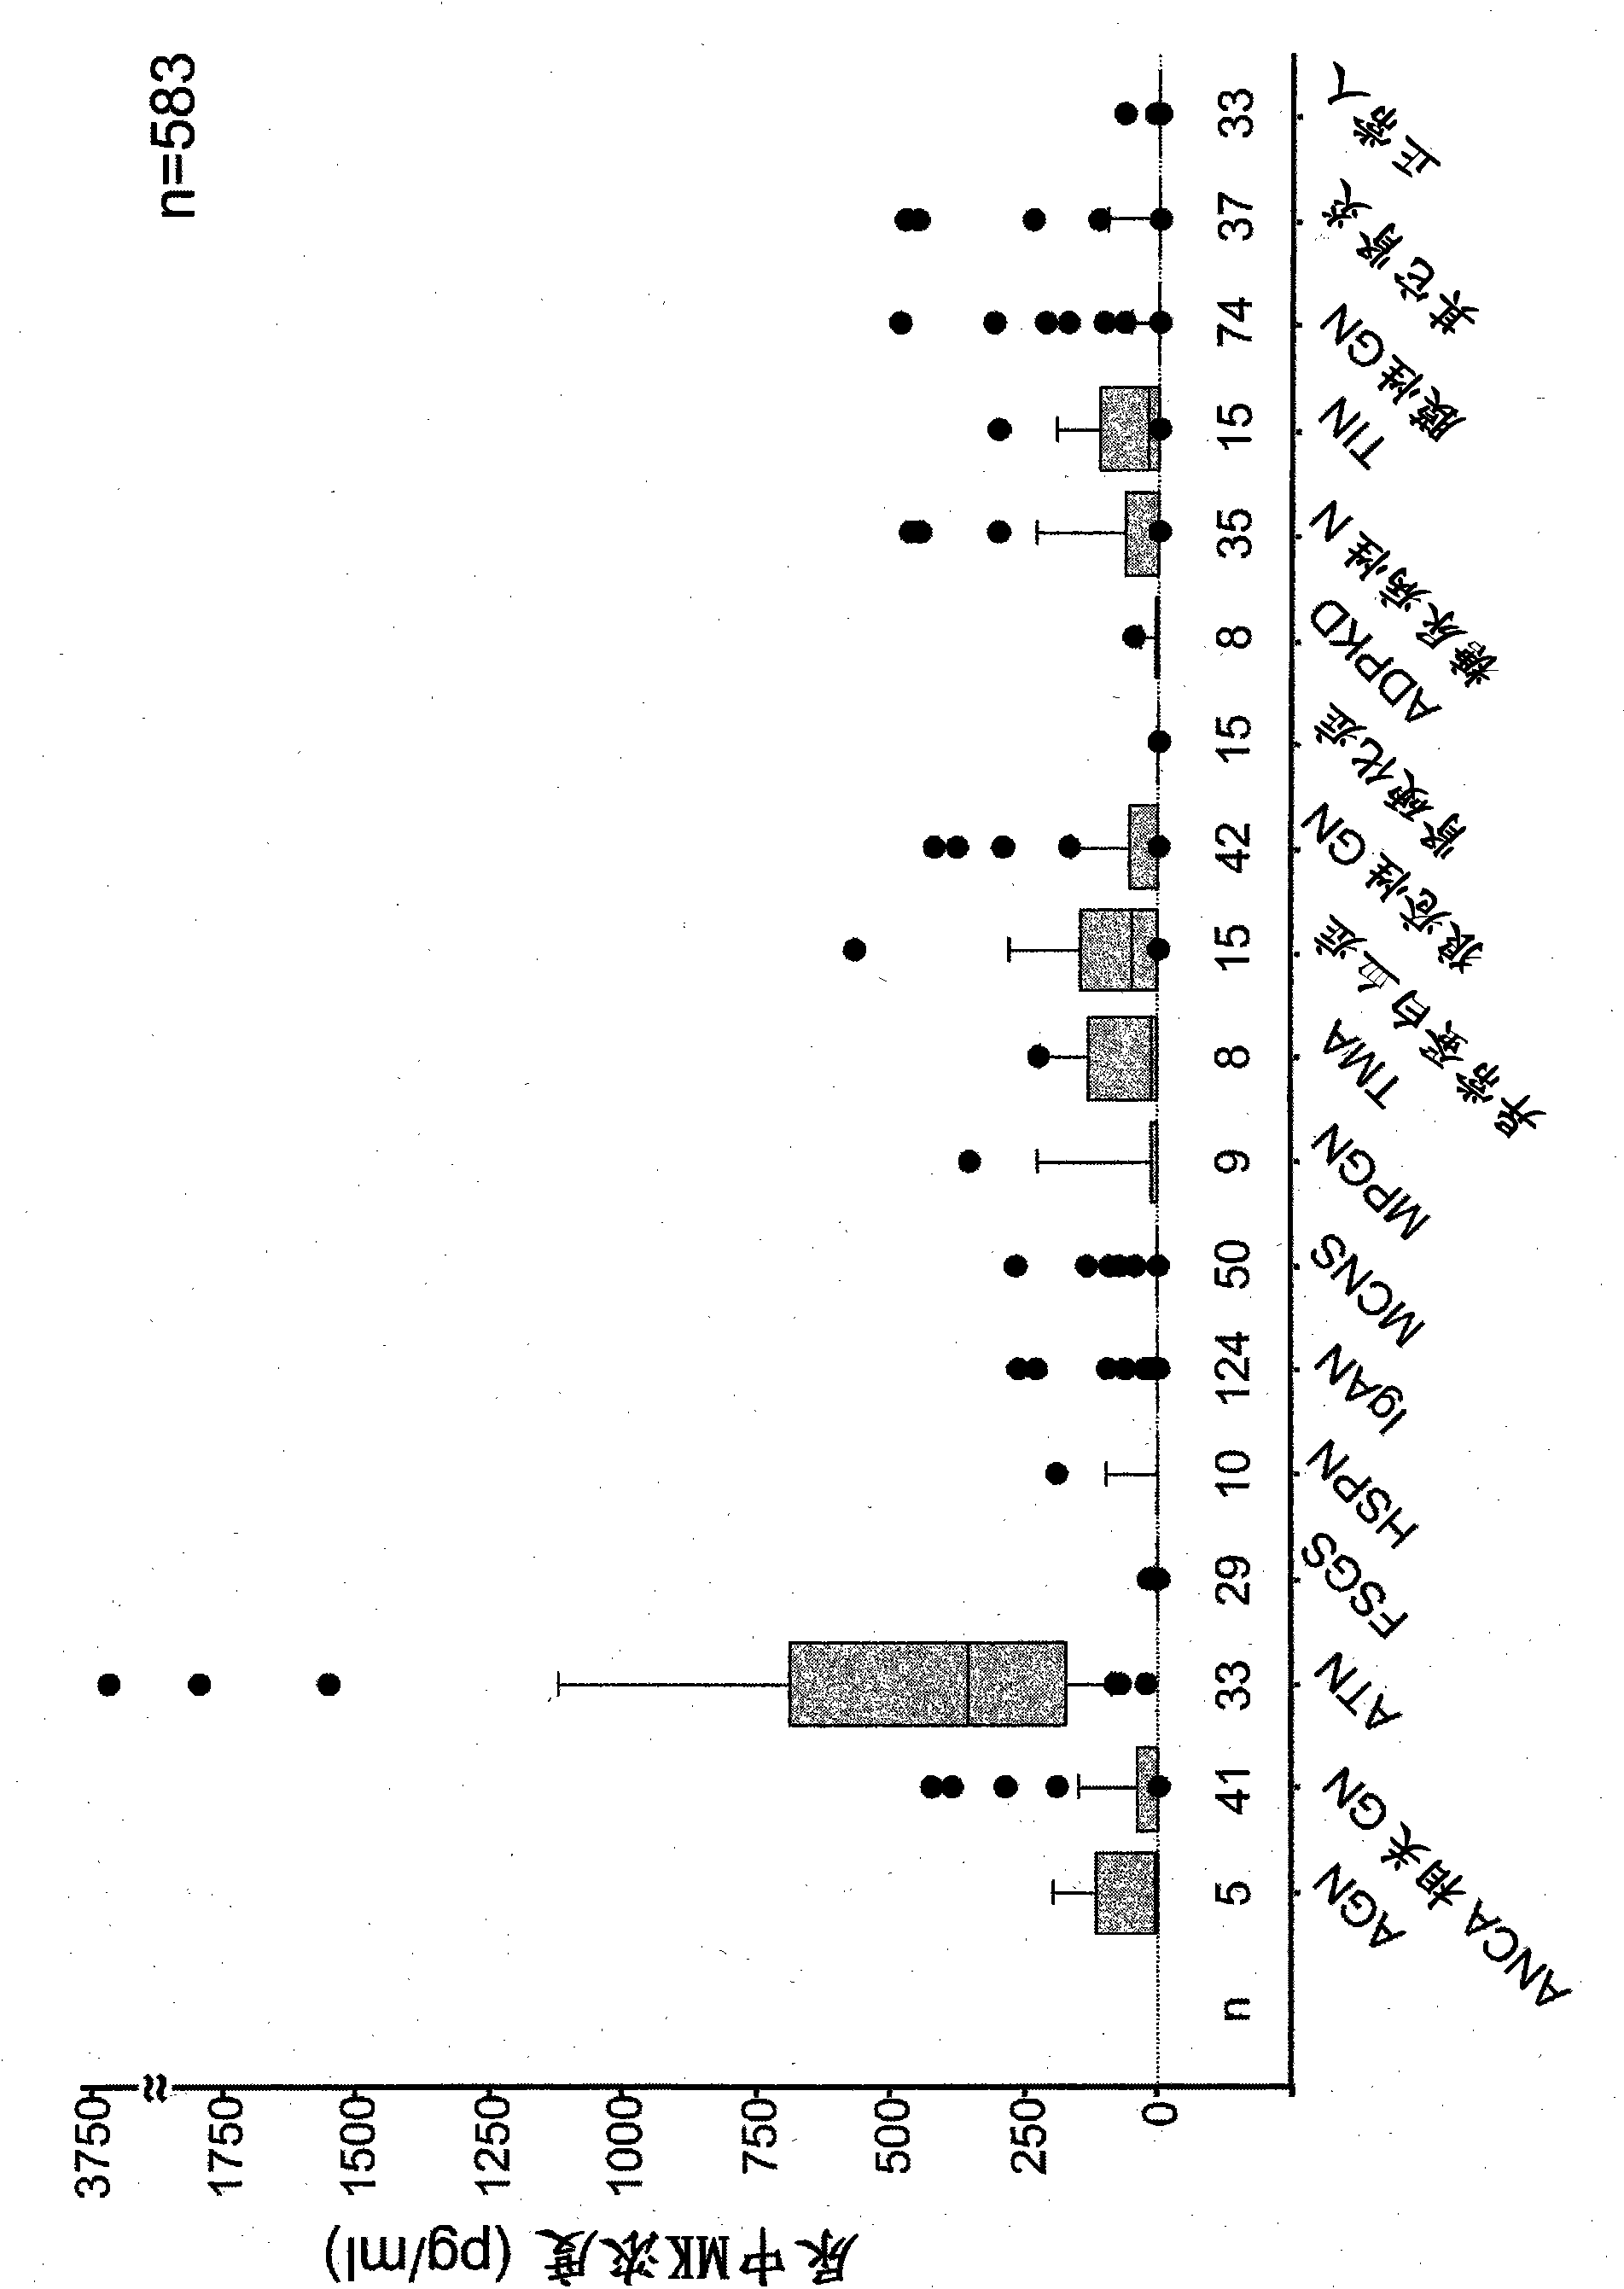 Biomarker for the estimation of acute renal disorder and prognosis of the disorder, and use of the biomarker